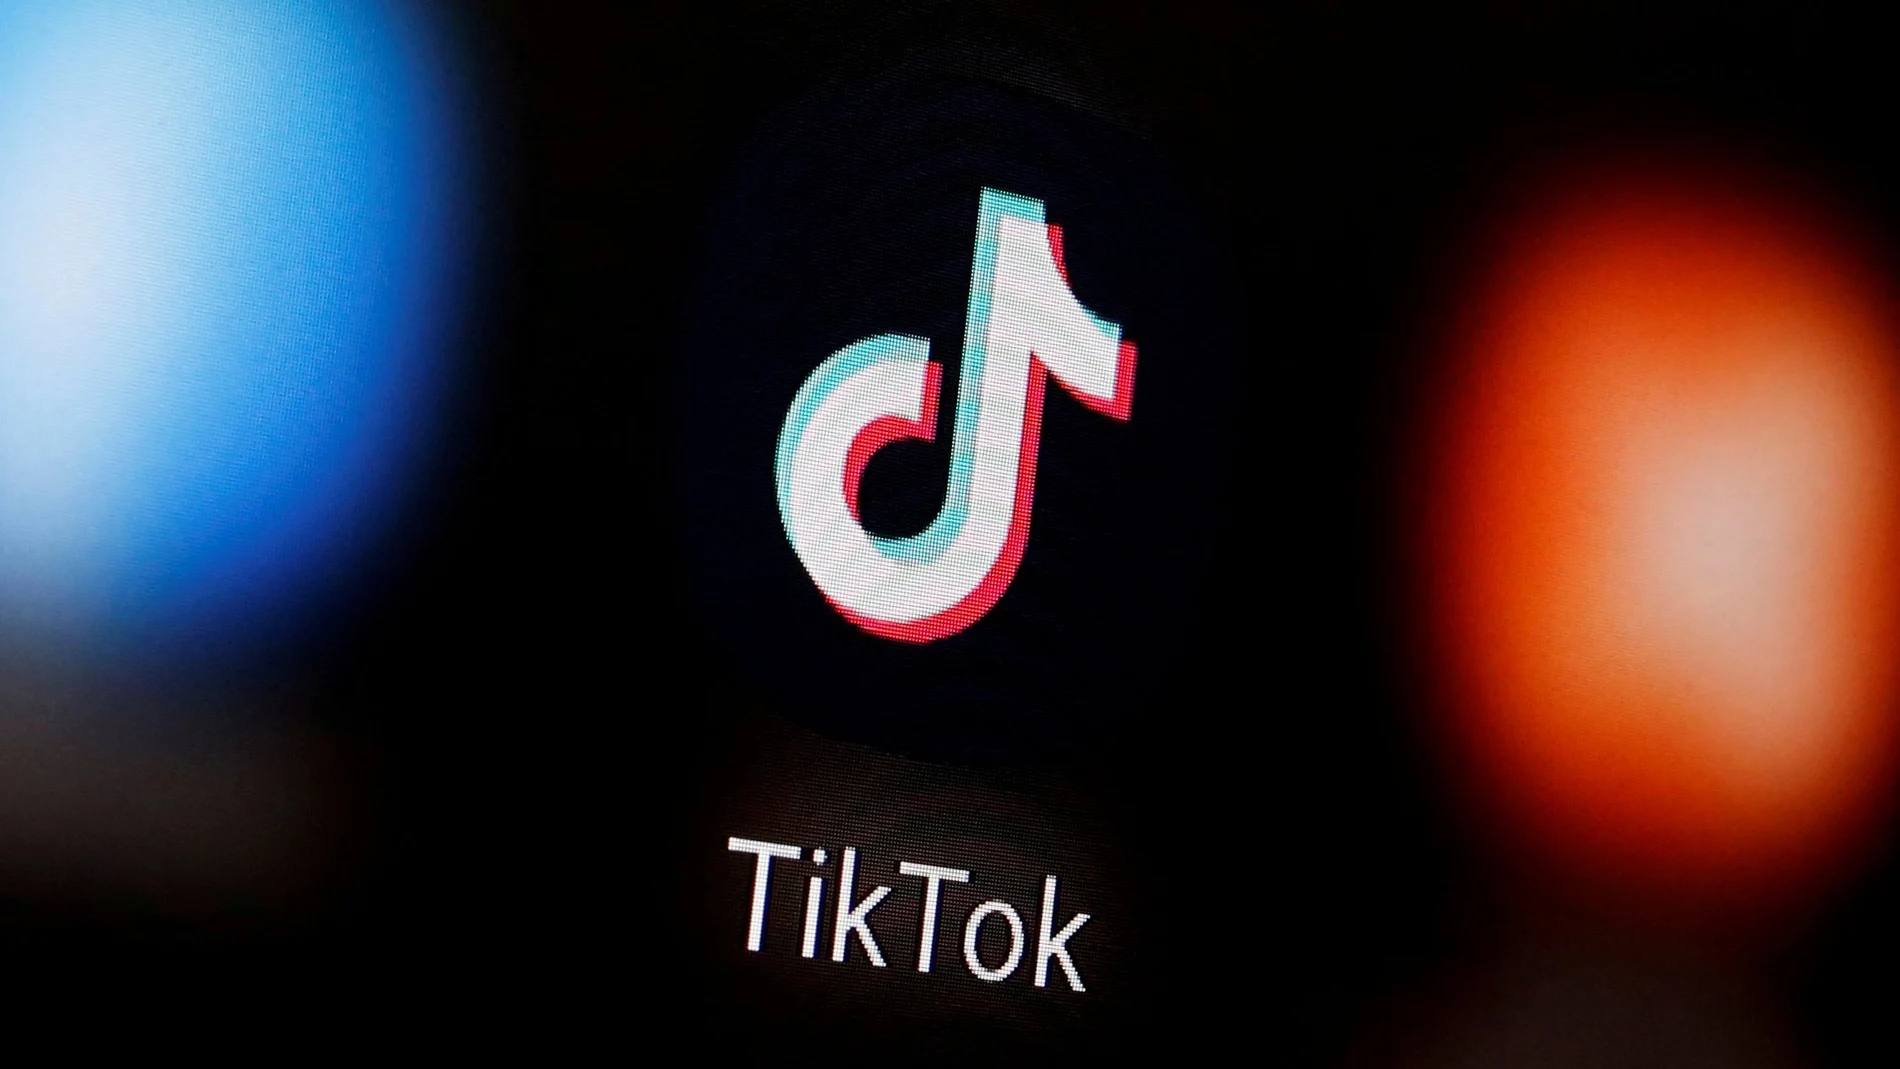 FILE PHOTO: A TikTok logo is displayed on a smartphone